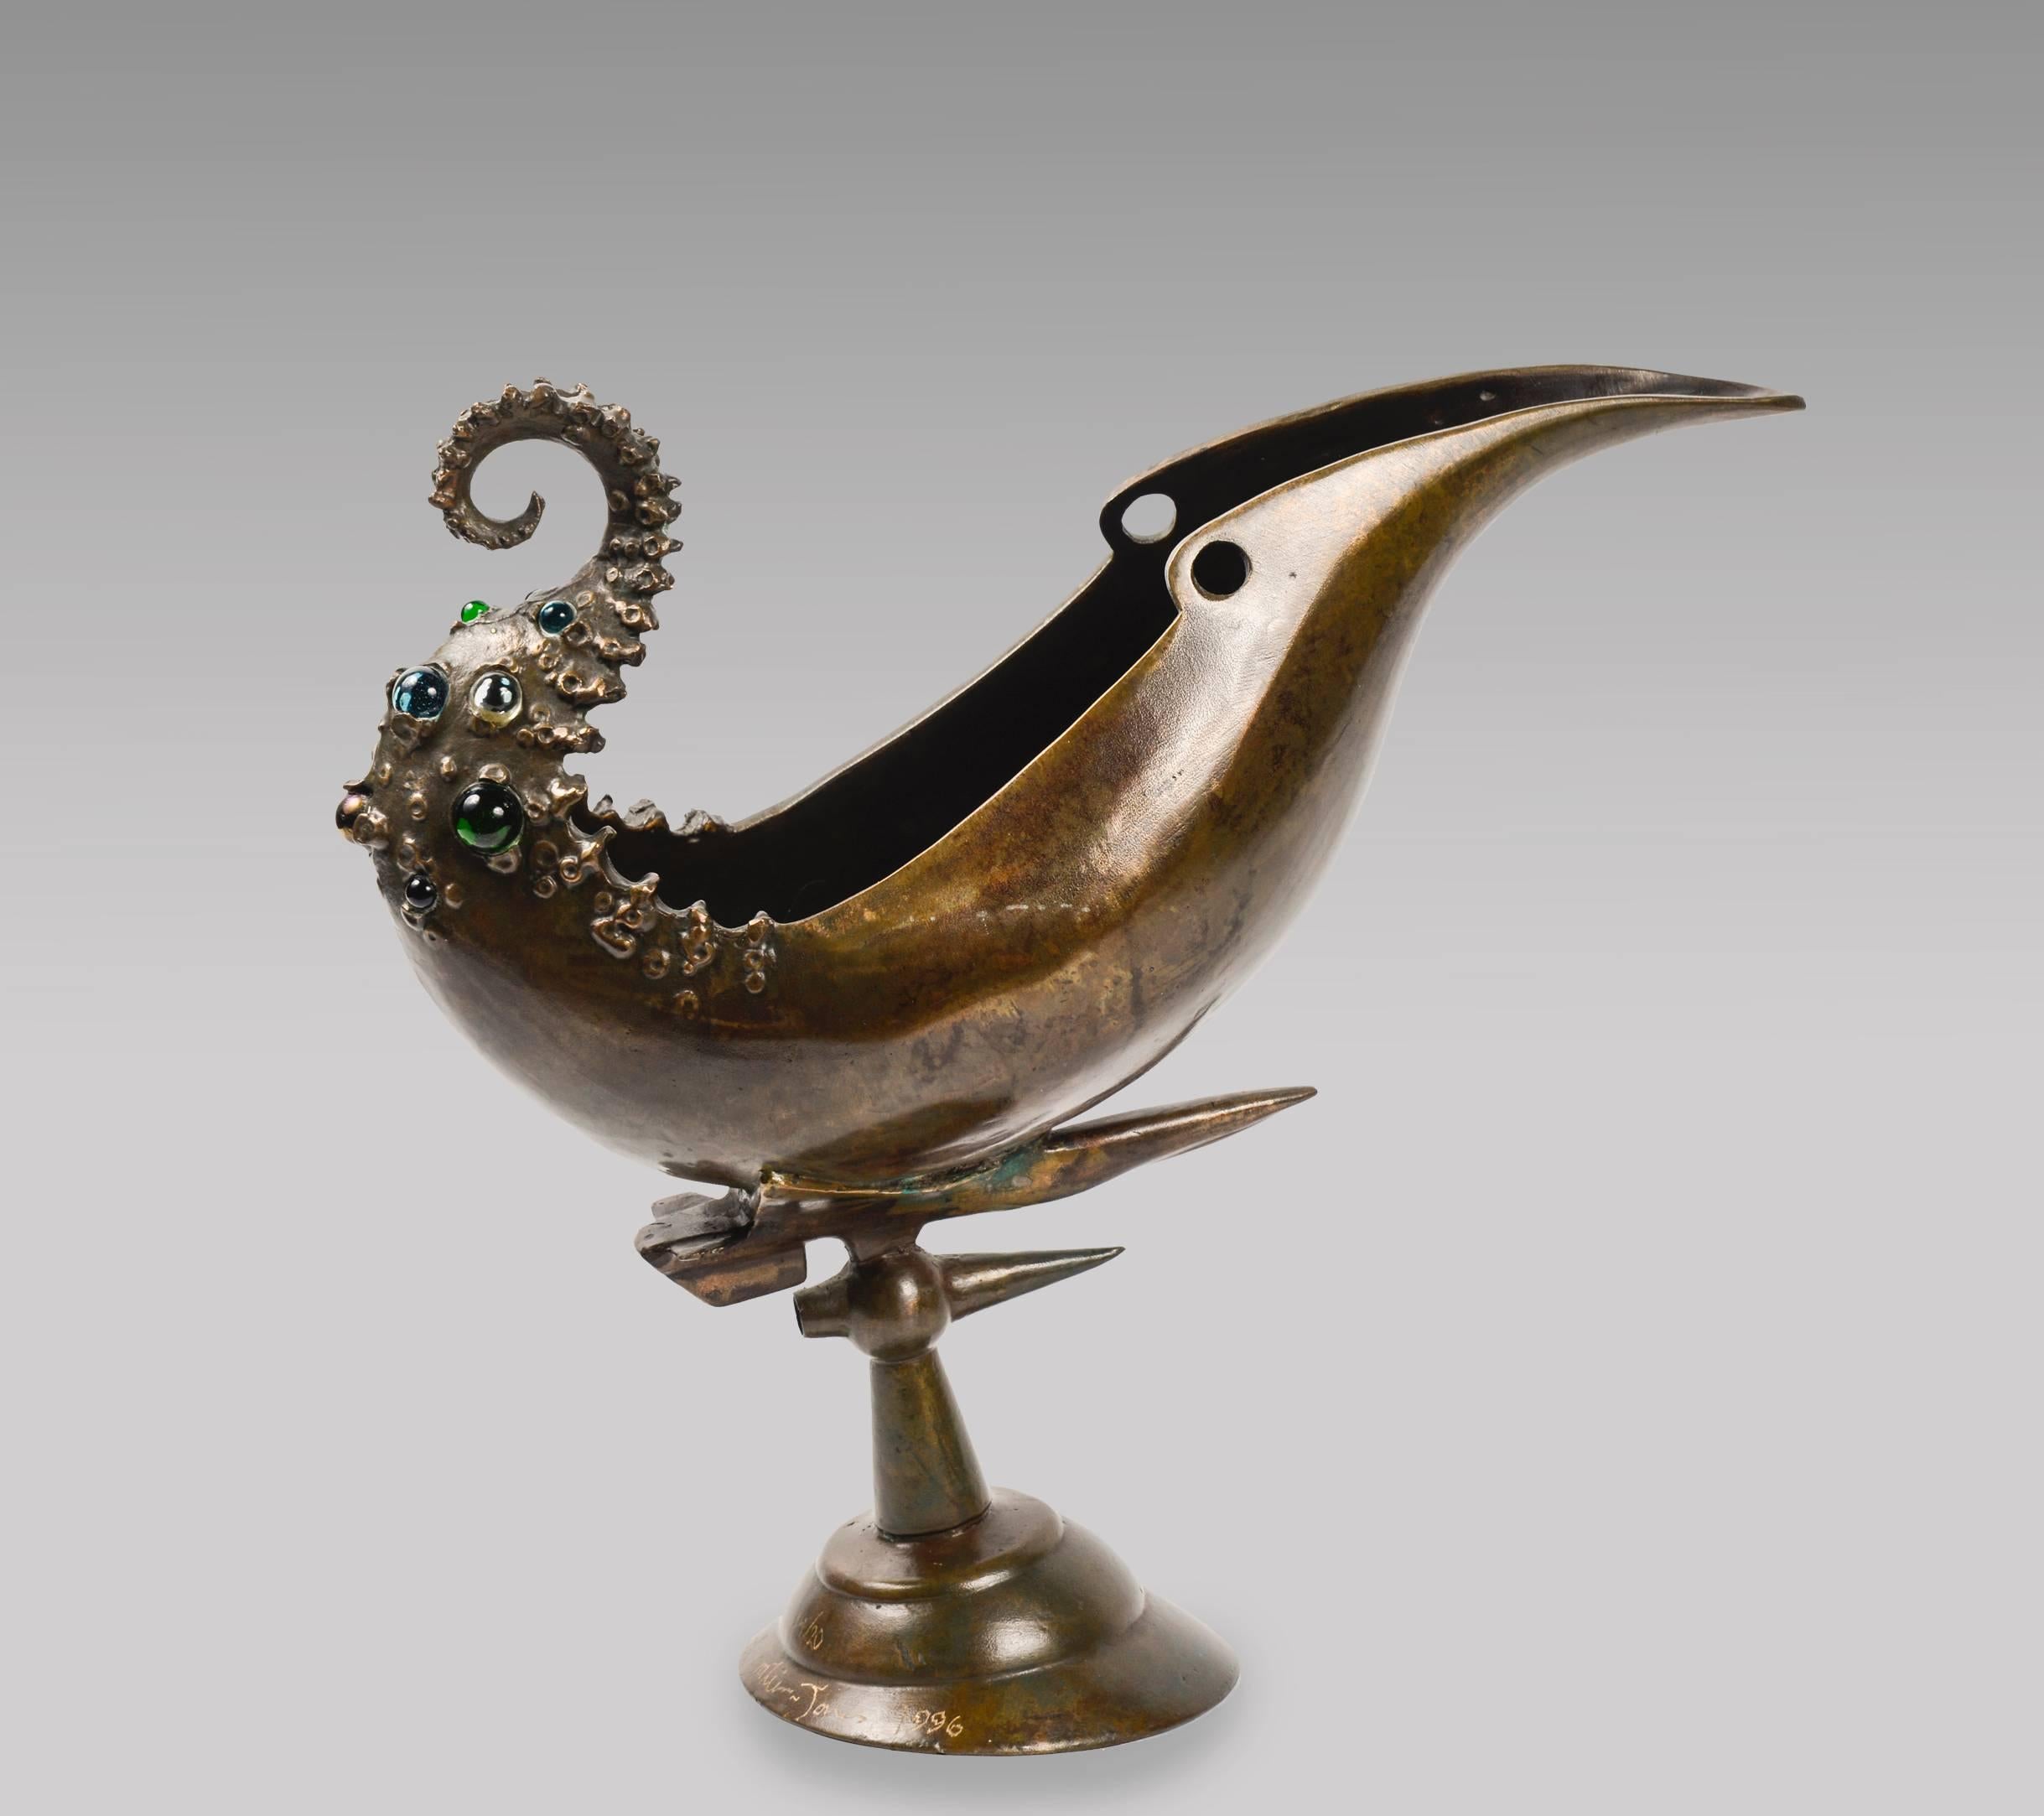 Mark Brazier-Jones.
Gravy Boat Centerpiece 1990.
Bronze and glass.
Measures: 25 cm heigh, 35 cm long, 12 cm depth.
Limited Edition of 20.
Edition Sold out in 1996.
Signed.
Reproduced page 86 in the Mark Brazier-Jones monograph, Edition Fiell